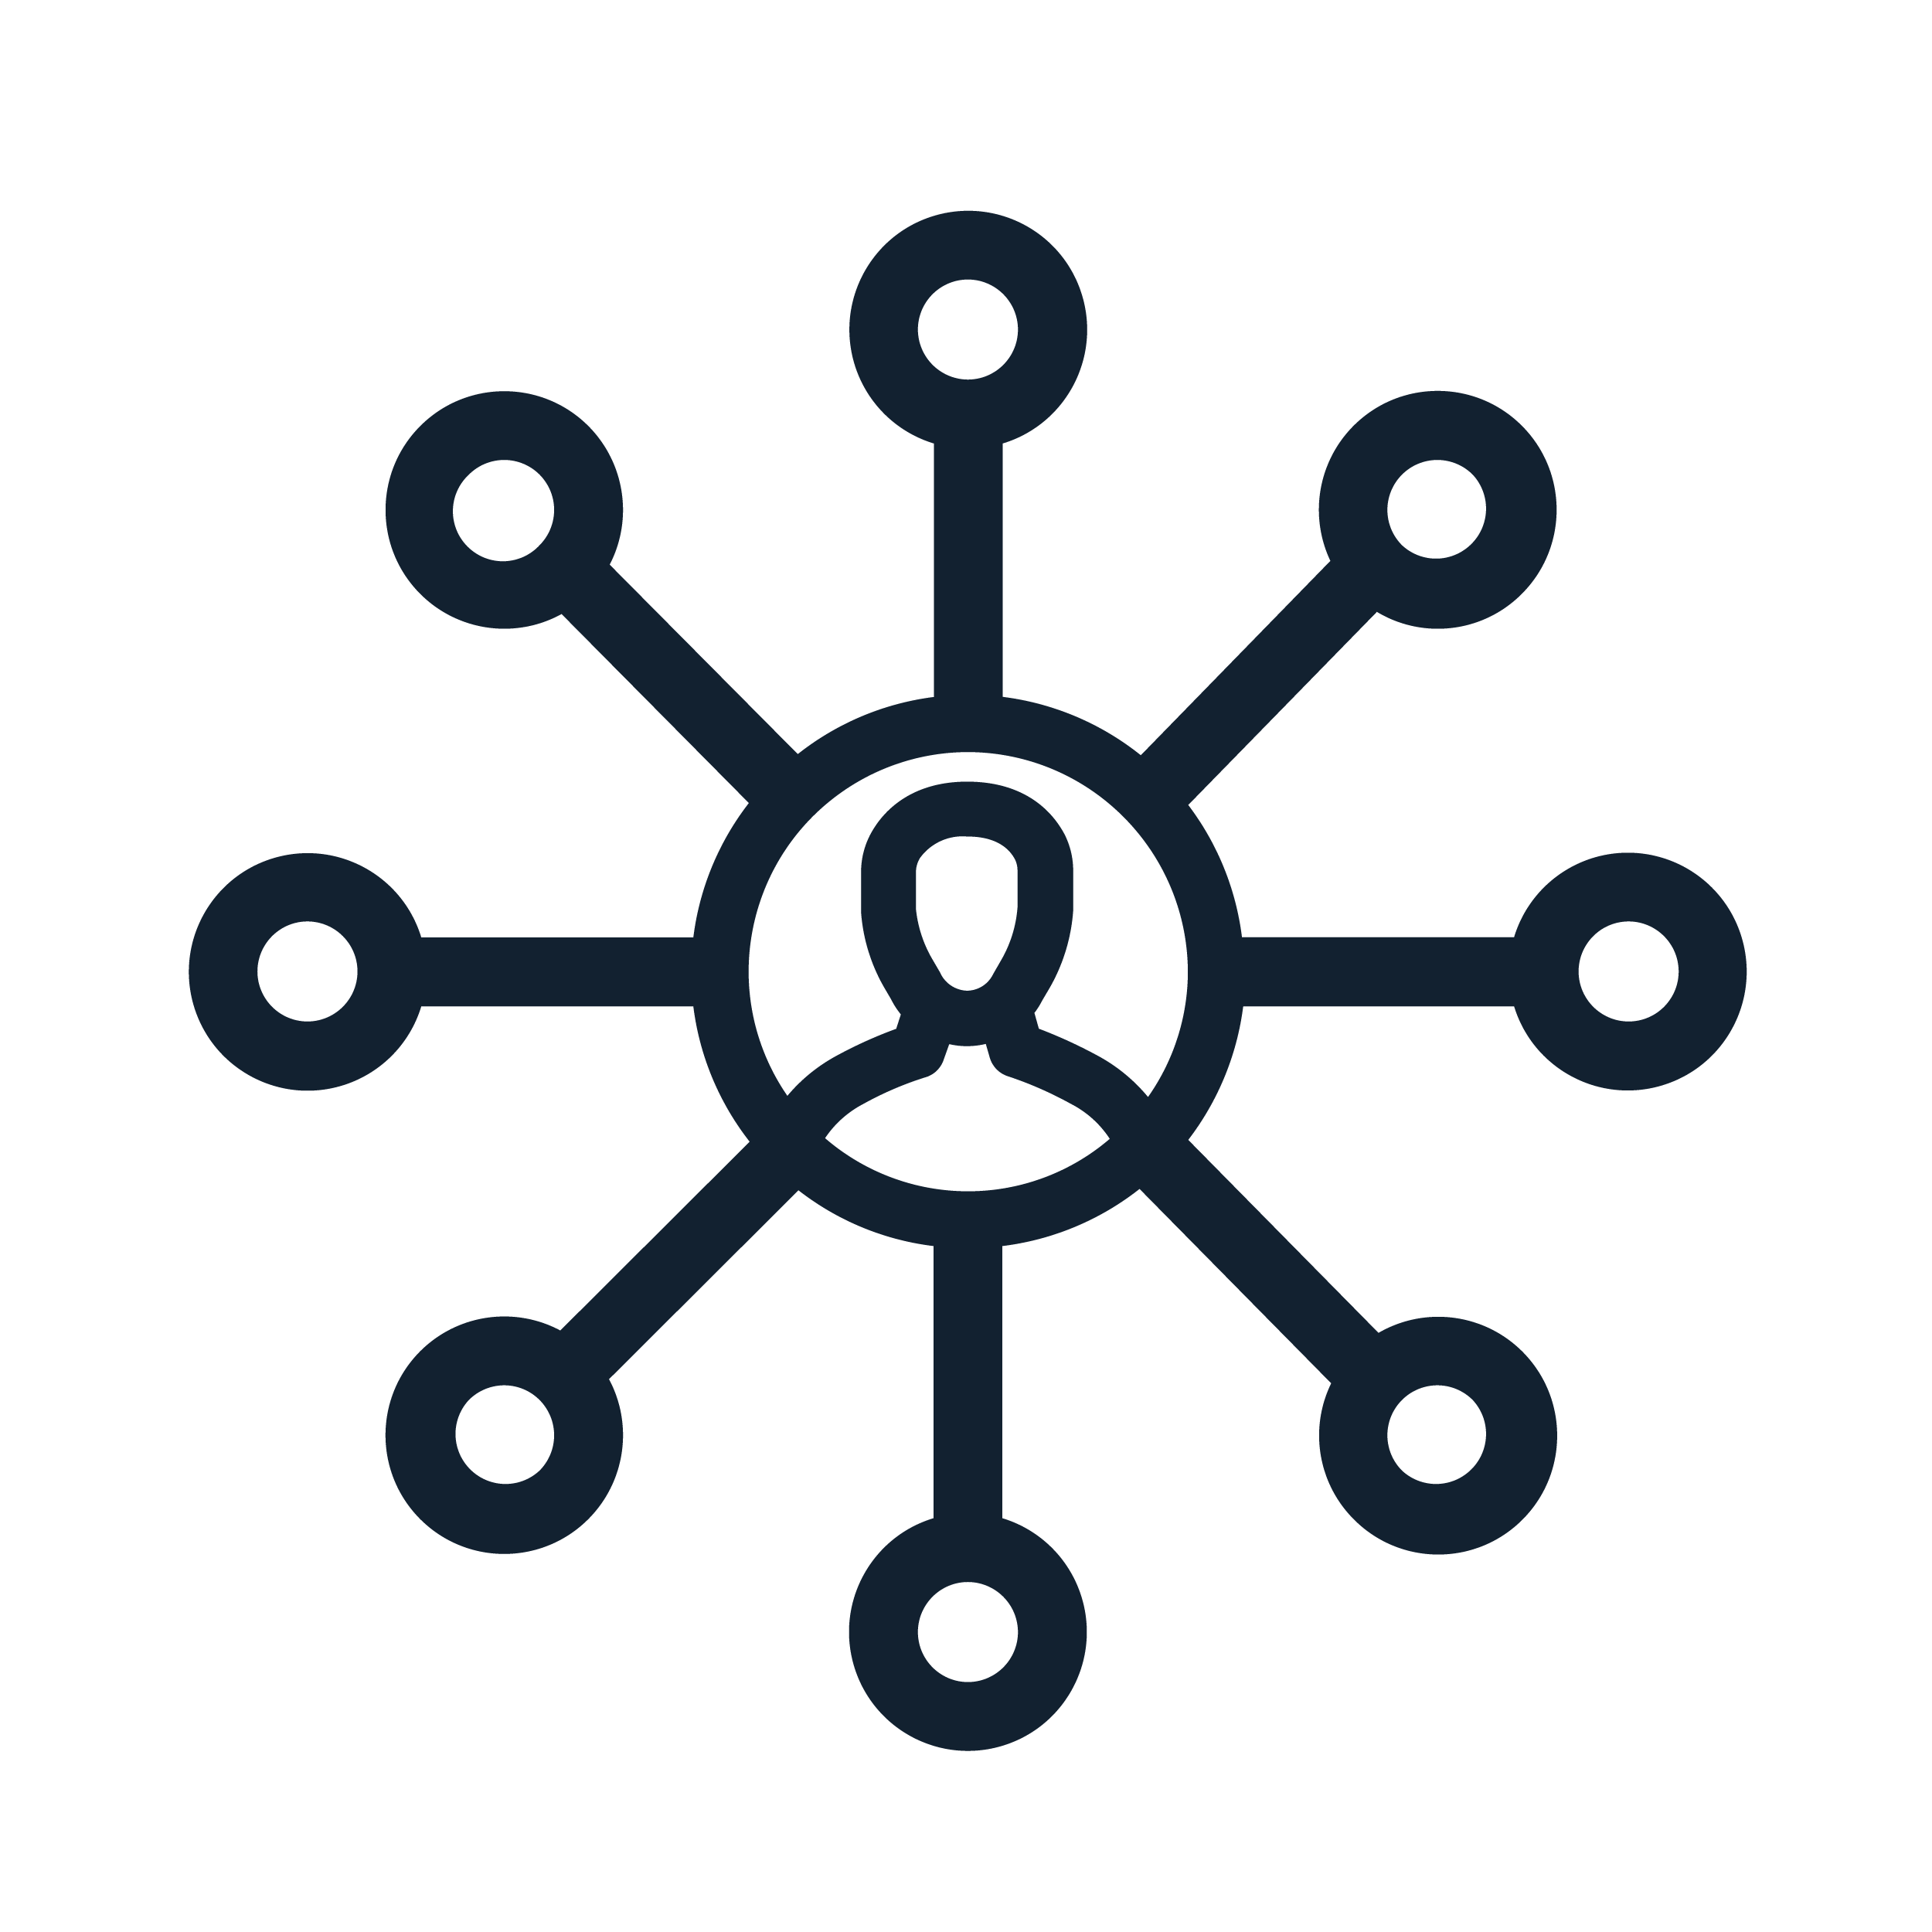 Icon of single, central individual connected to points surrounding them